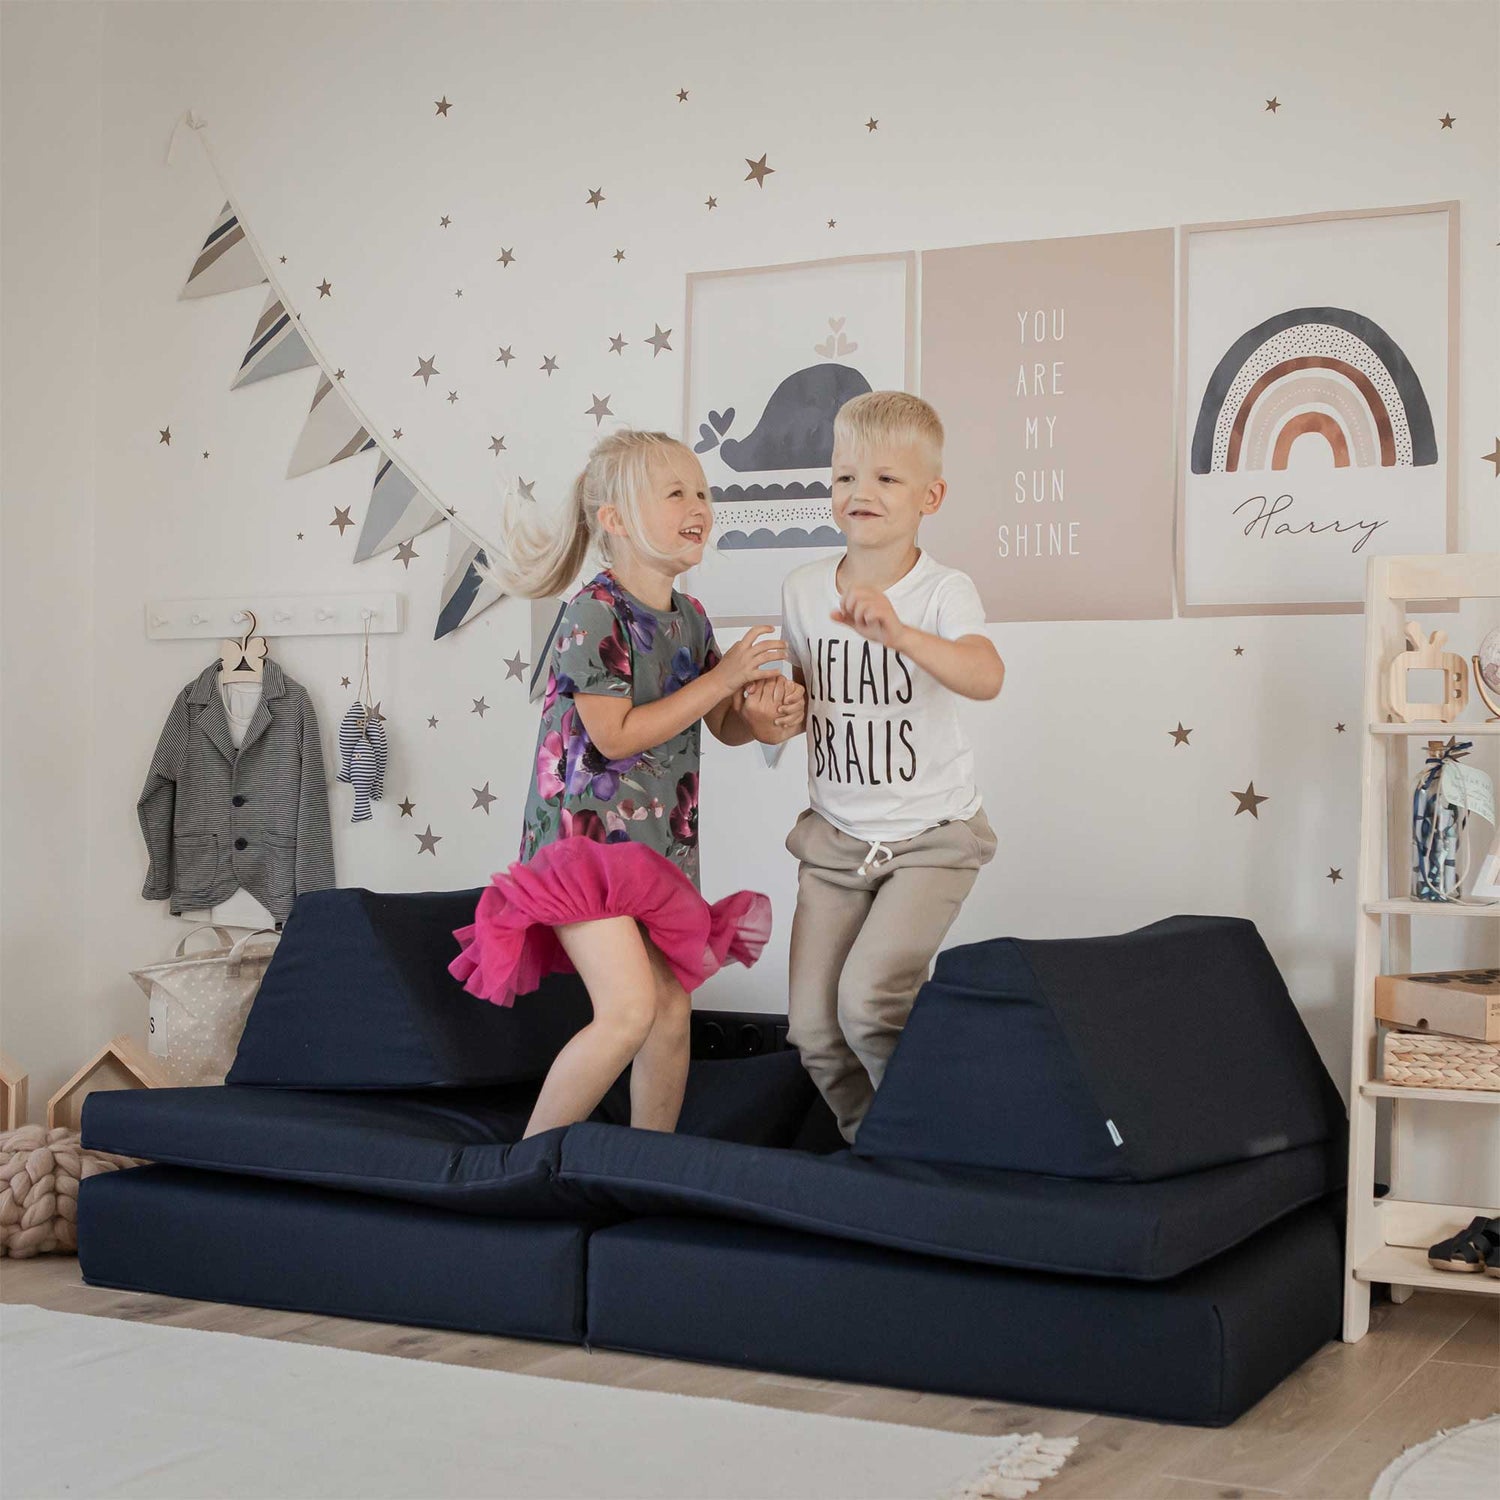 Two children playing on a couch in a child's room.